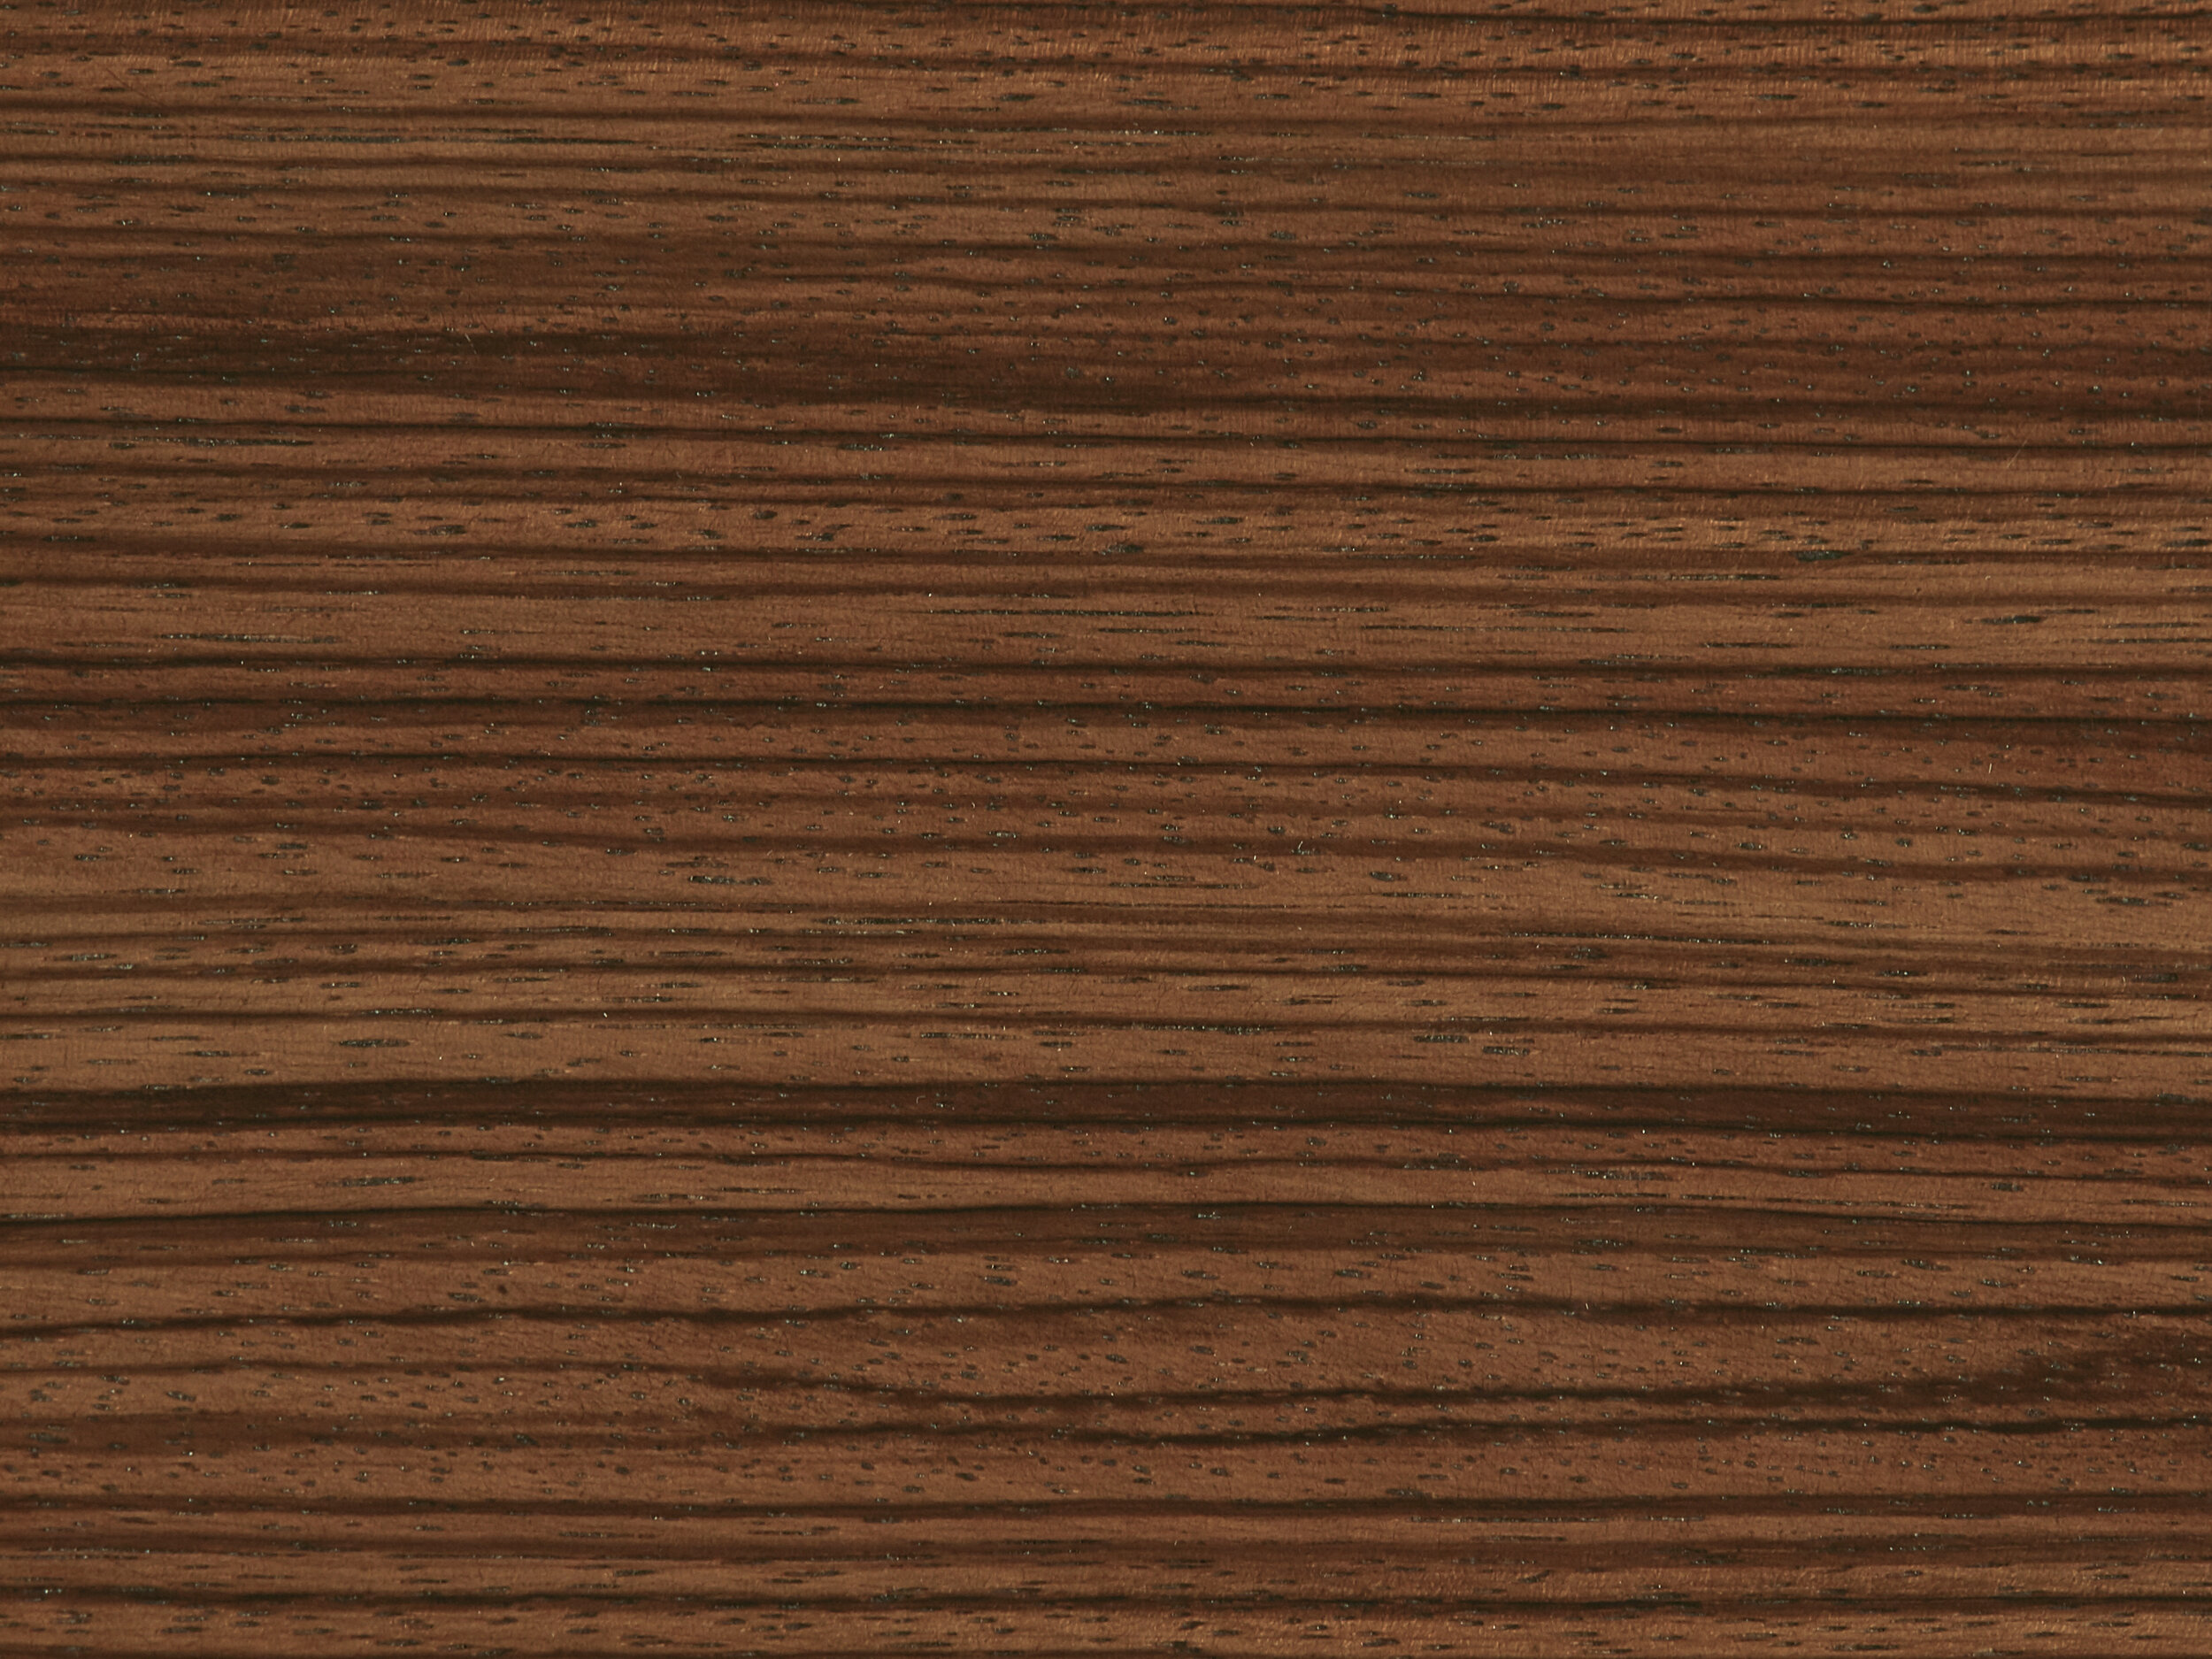 Zebrawood Lacquer